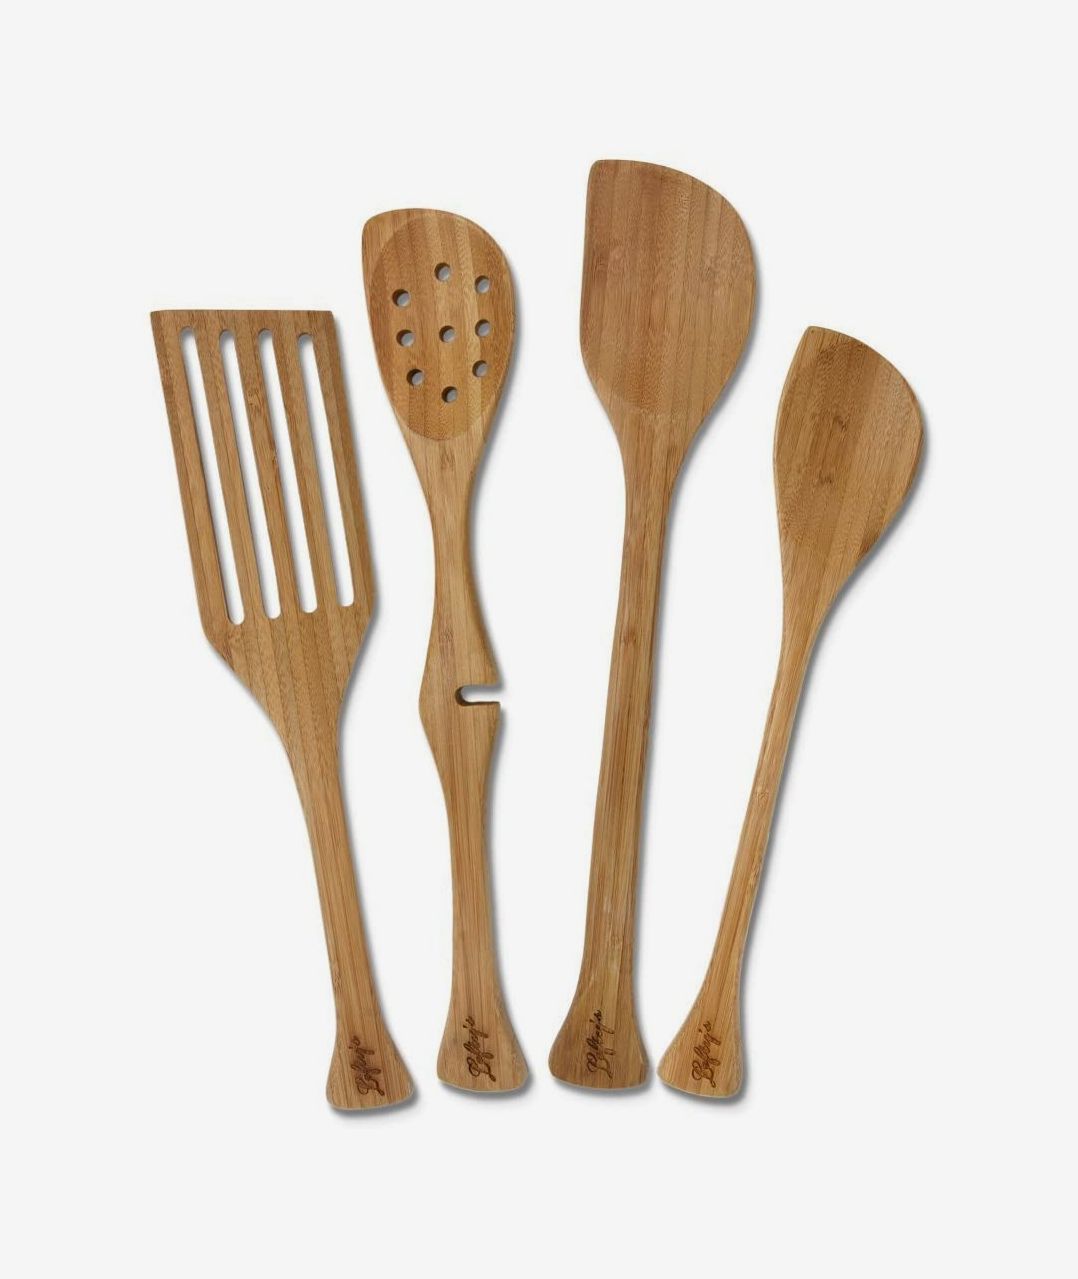 Wonderful Handmade Left Handed Gifts for Cooking and Serving